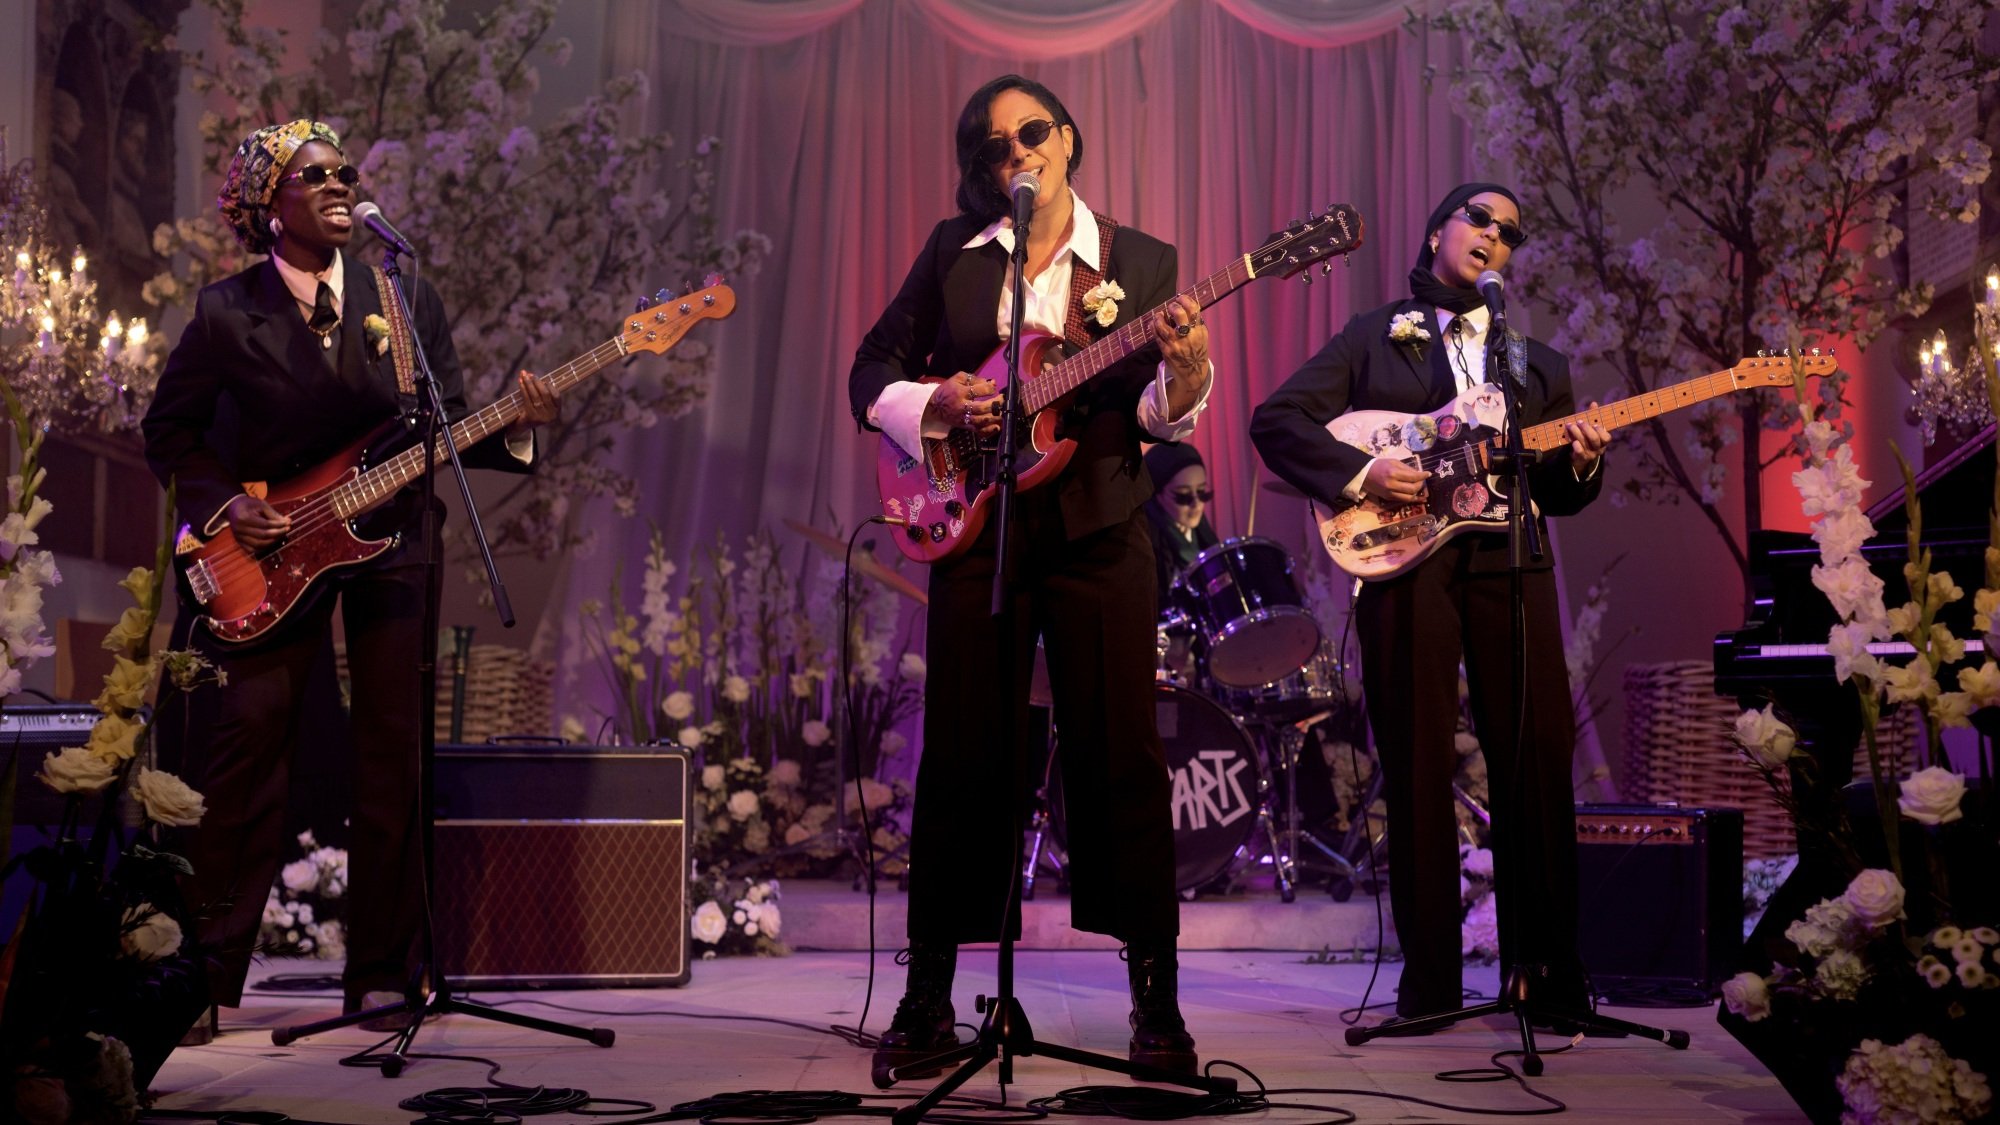 Four women in suits, some wearing head coverings, play in a rock band in a church.